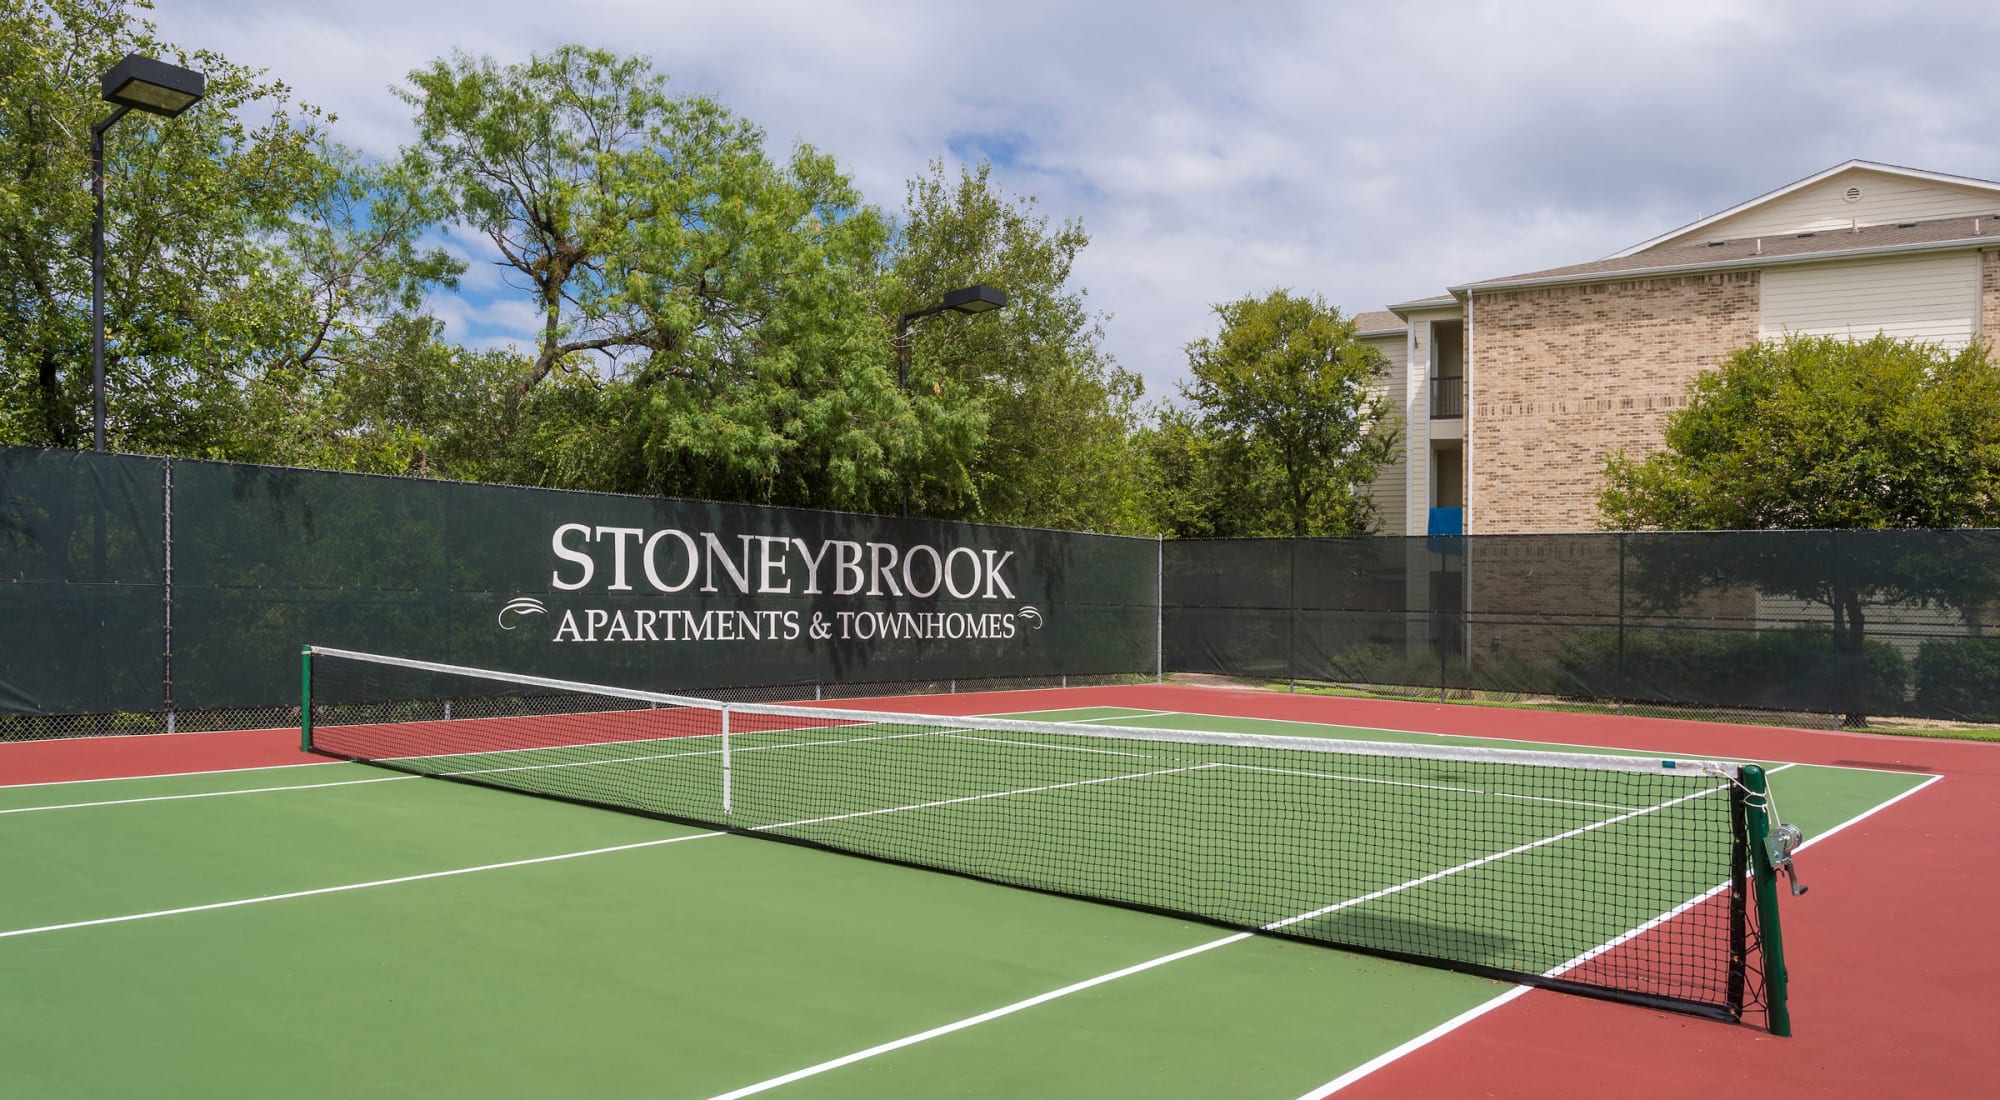 Lighted Tennis Court at Stoneybrook Apartments & Townhomes